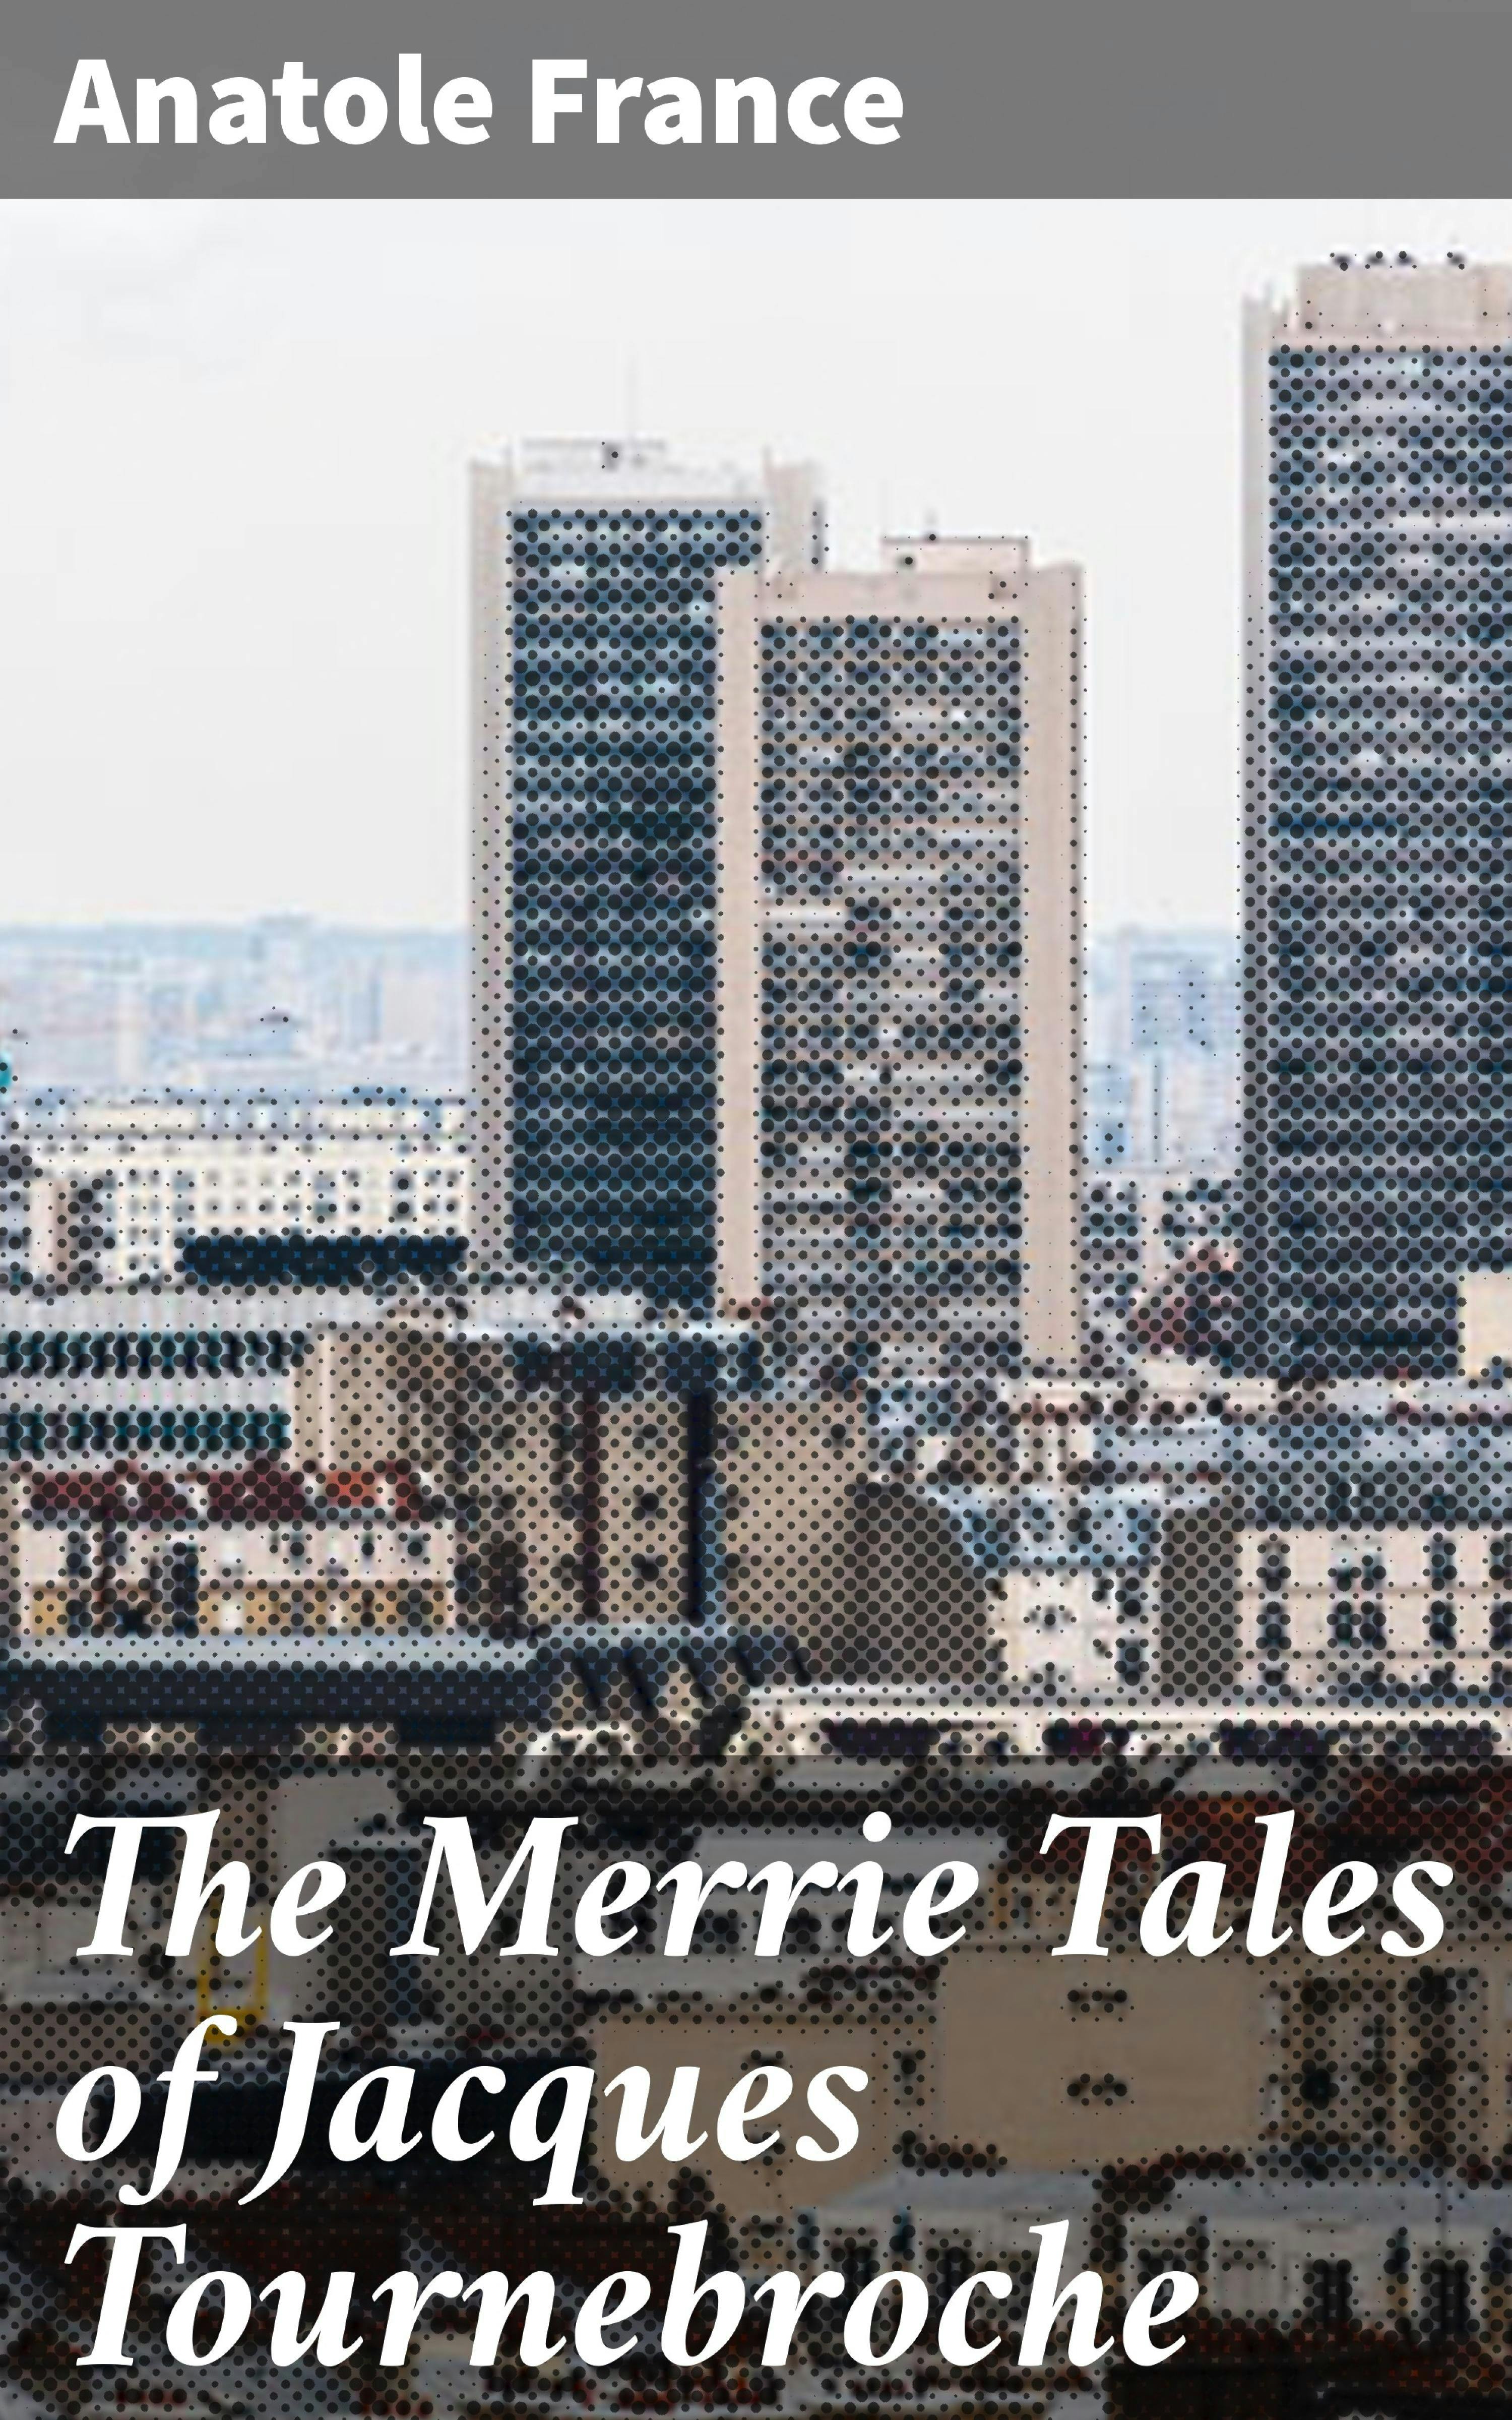 The Merrie Tales of Jacques Tournebroche - Anatole France